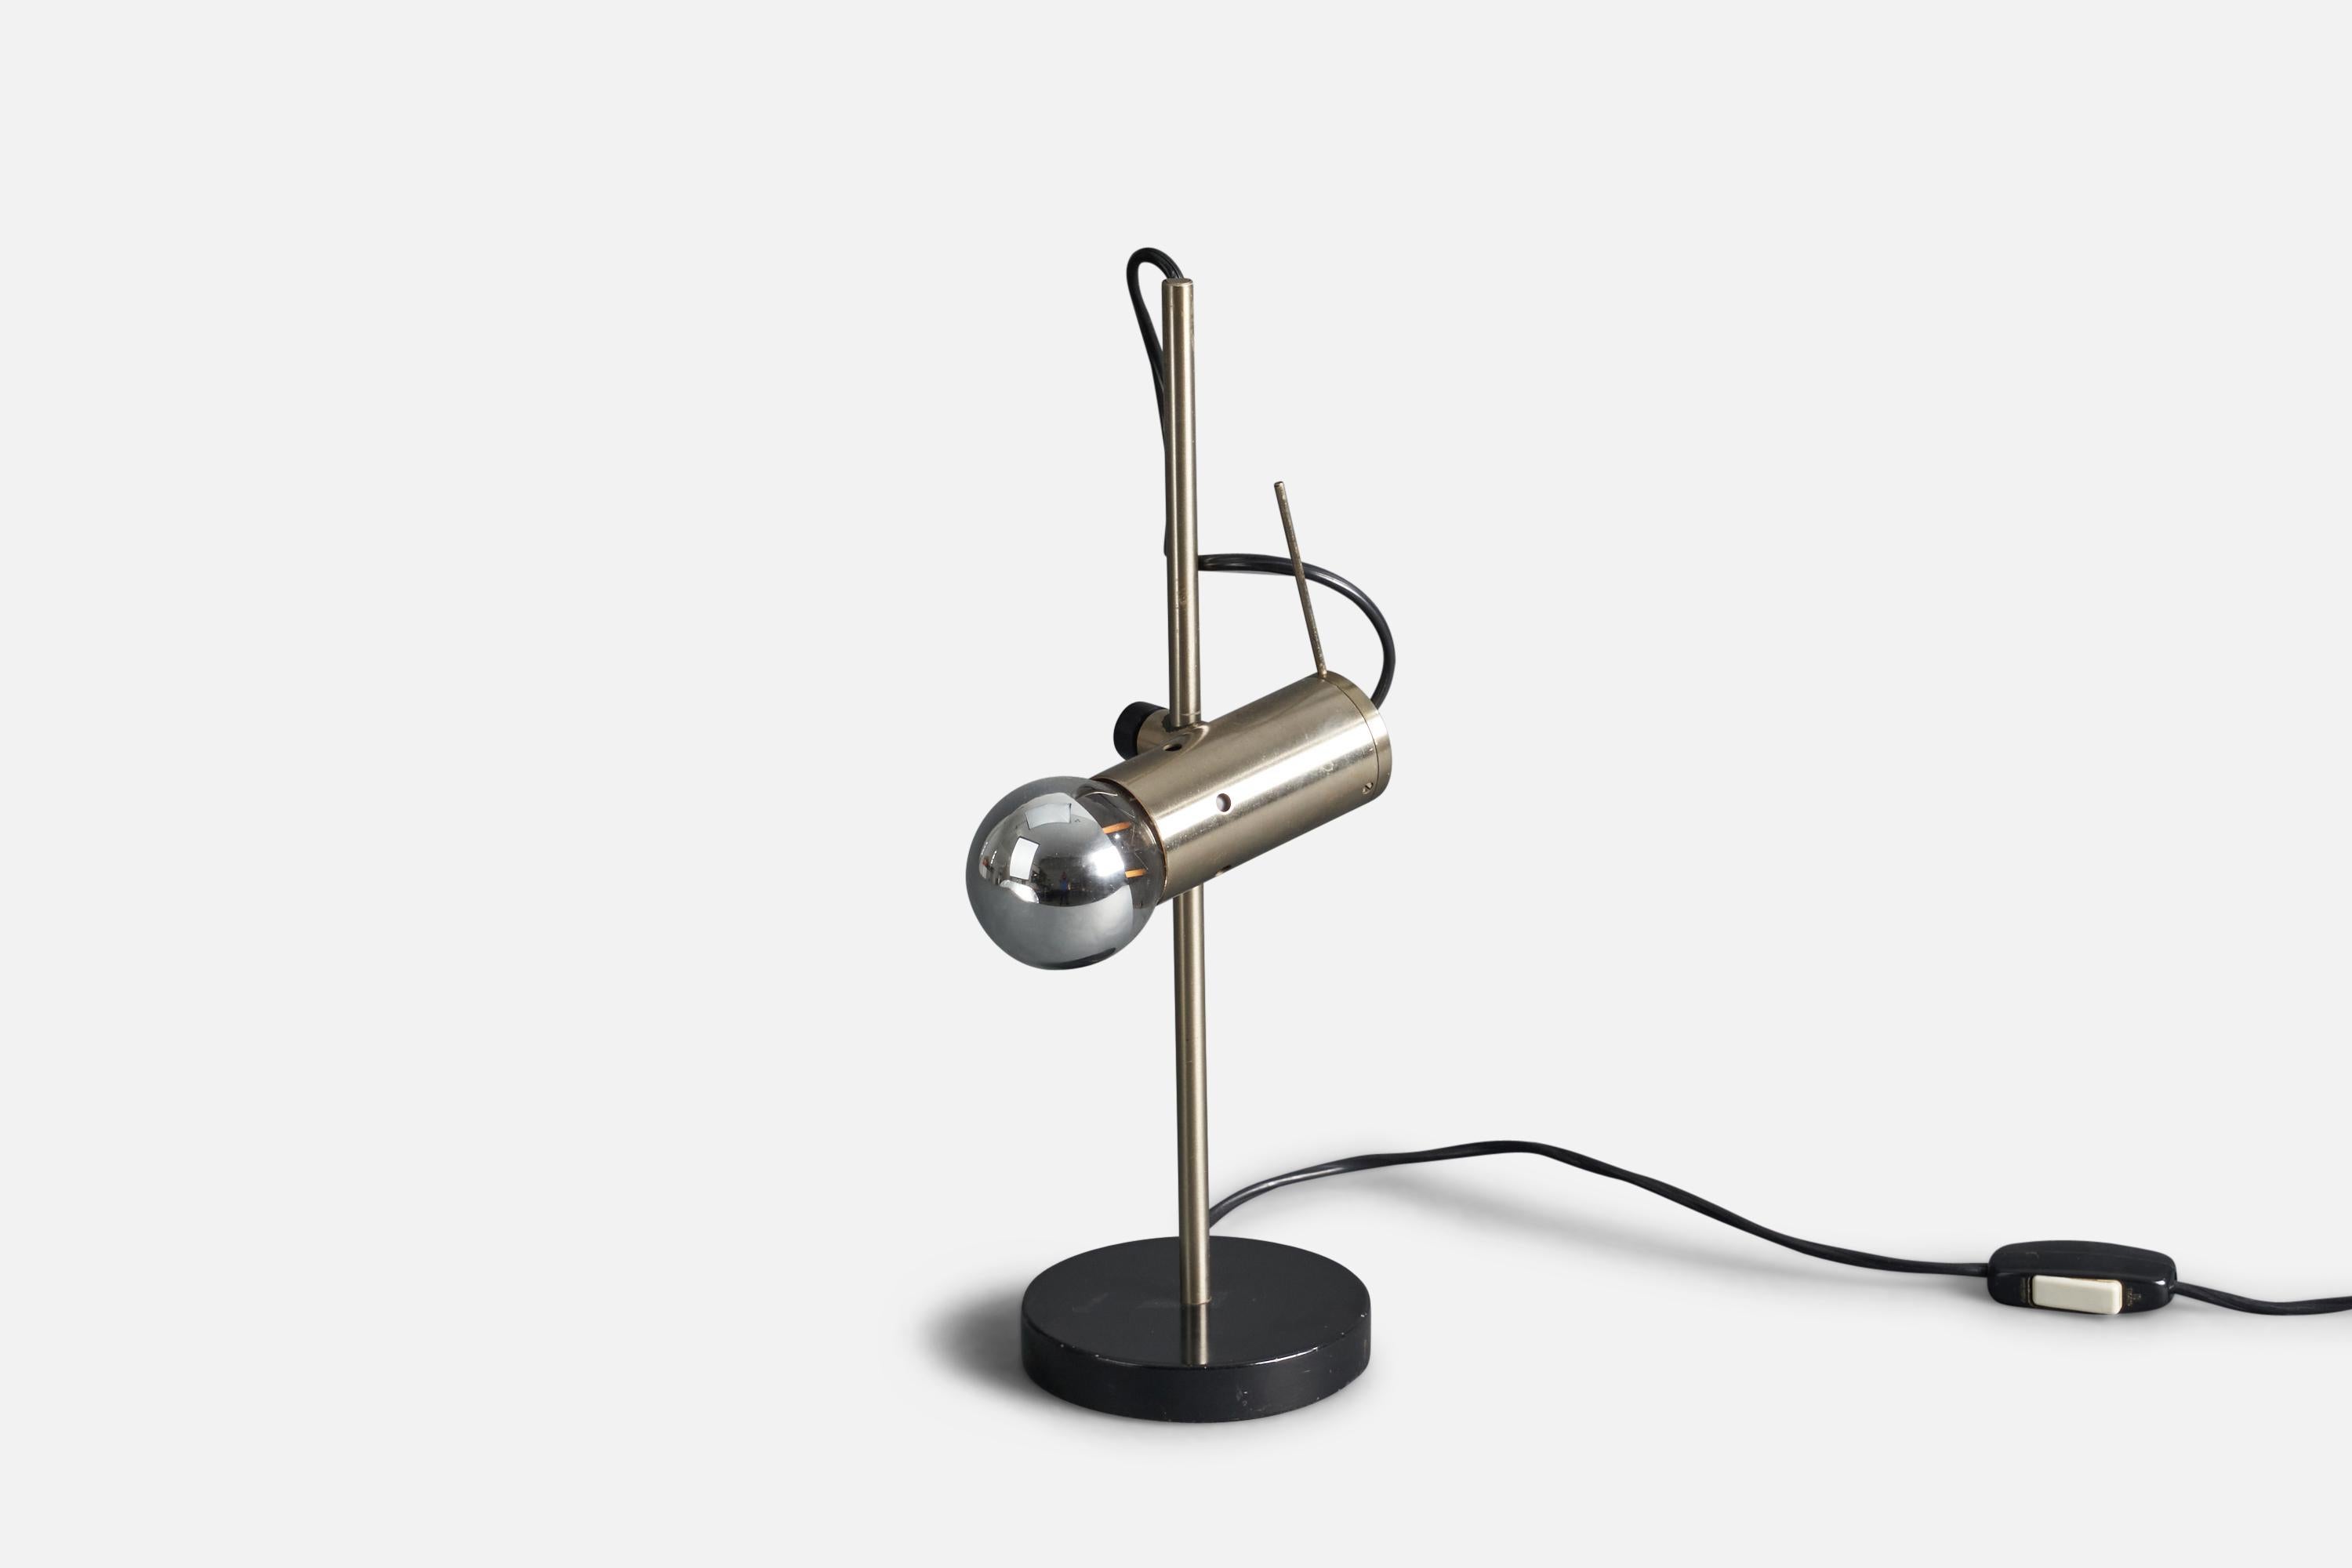 A steel and metal table lamp designed by Tito Agnoli and produced by O-Luce, Italy, 1953.

Socket takes standard E-26 medium base bulb.

There is no maximum wattage stated on the fixture.